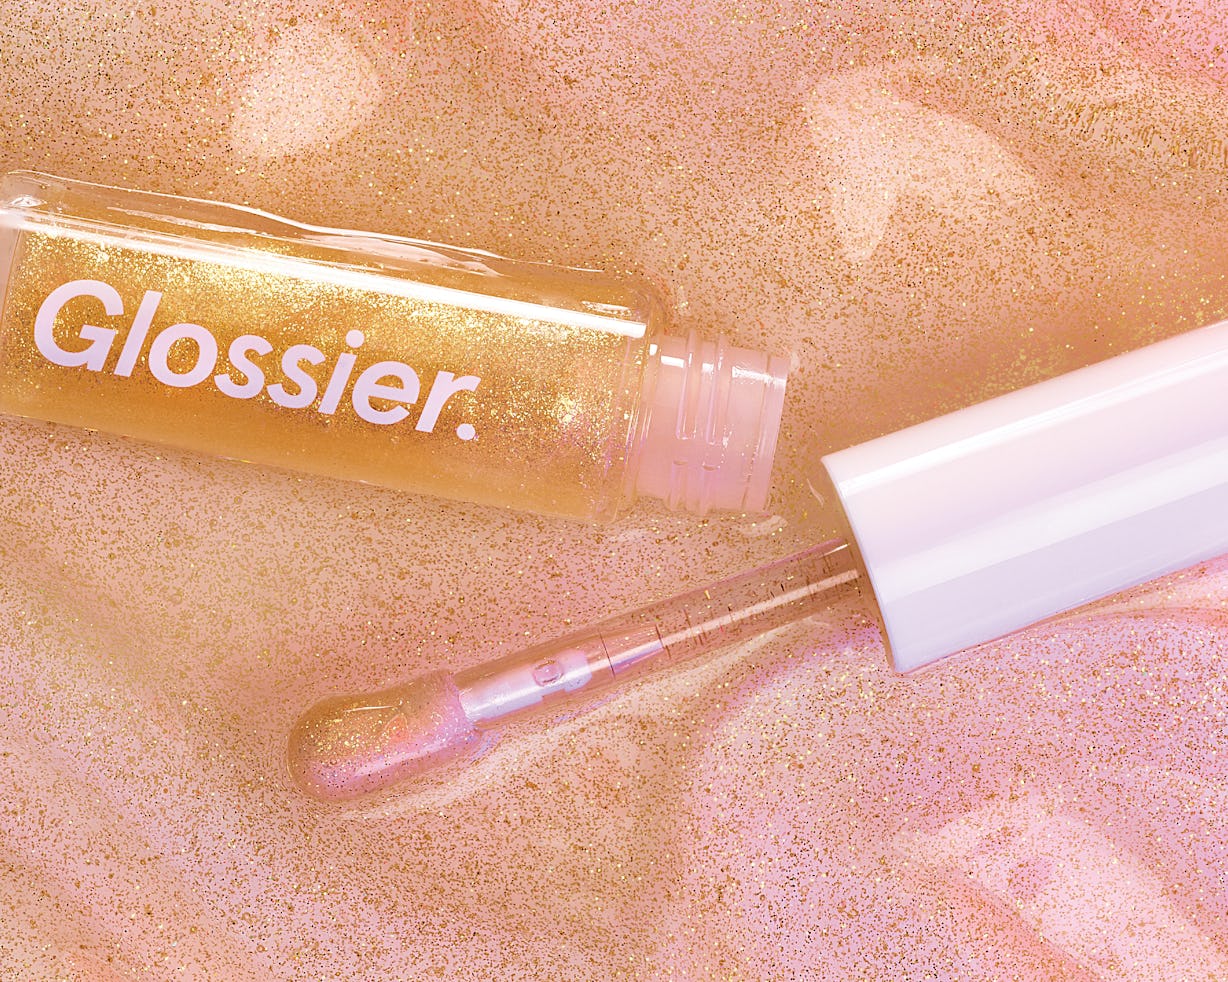 Glossier's 2020 Holiday Collection Brought Back The Brand's Popular